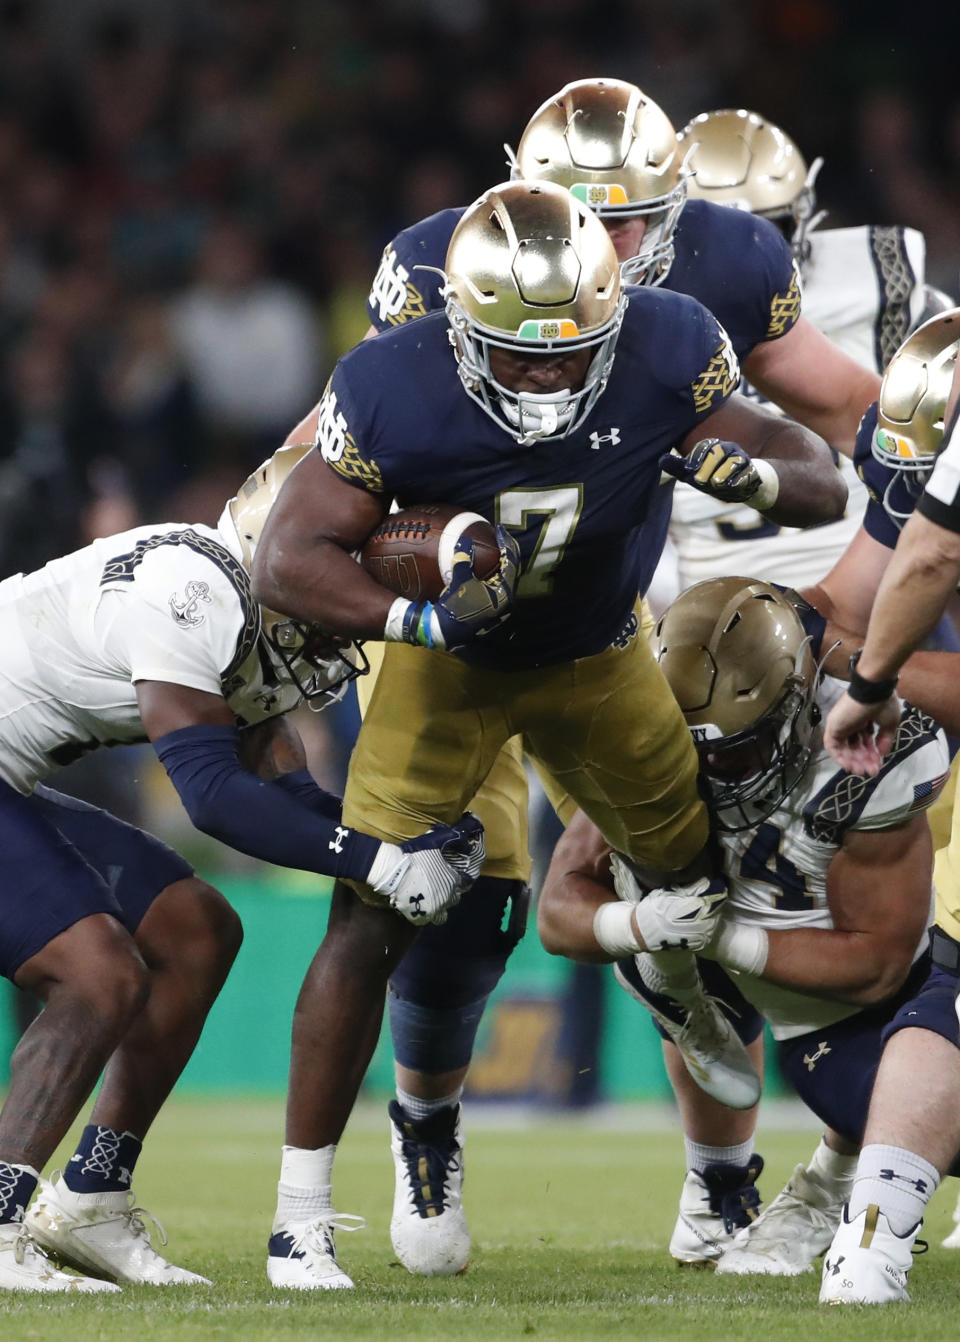 Notre Dame running back Audric Estime (7) is stopped on a run against Navy during the second half of an NCAA college football game in Dublin, Ireland, Aug. 26, 2023. (AP Photo/Peter Morrison)